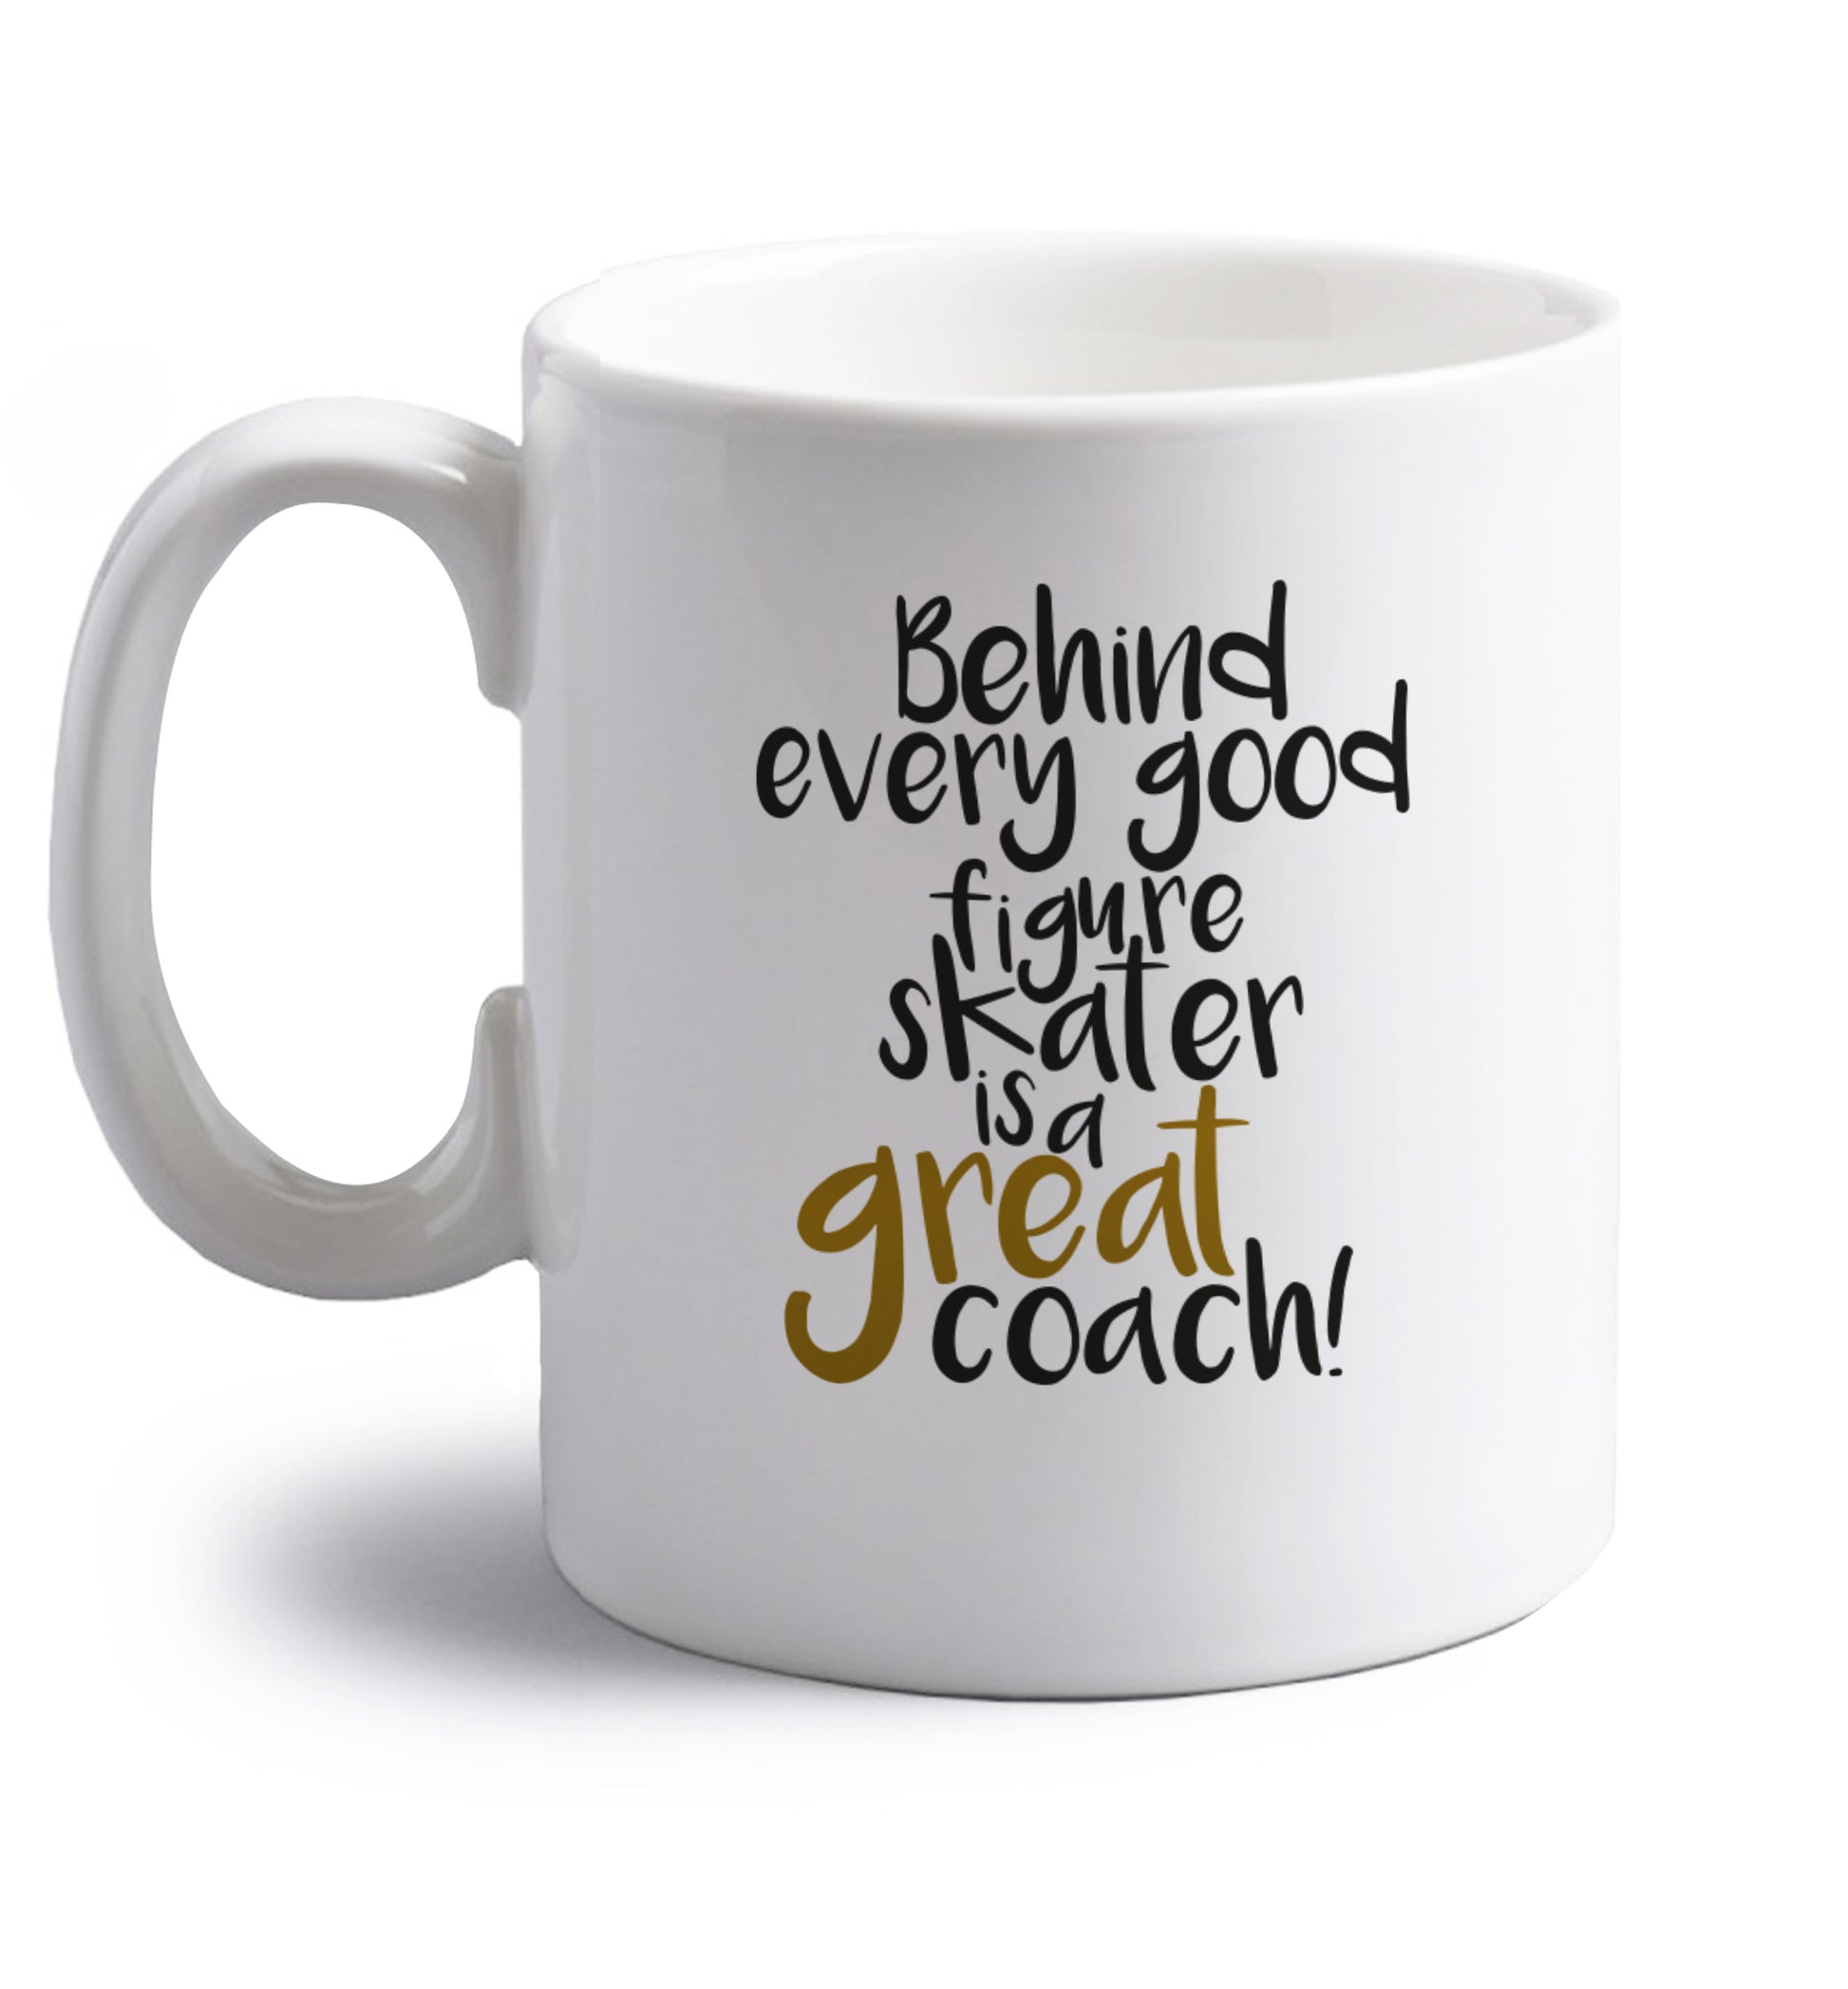 Behind every good figure skater is a great coach right handed white ceramic mug 